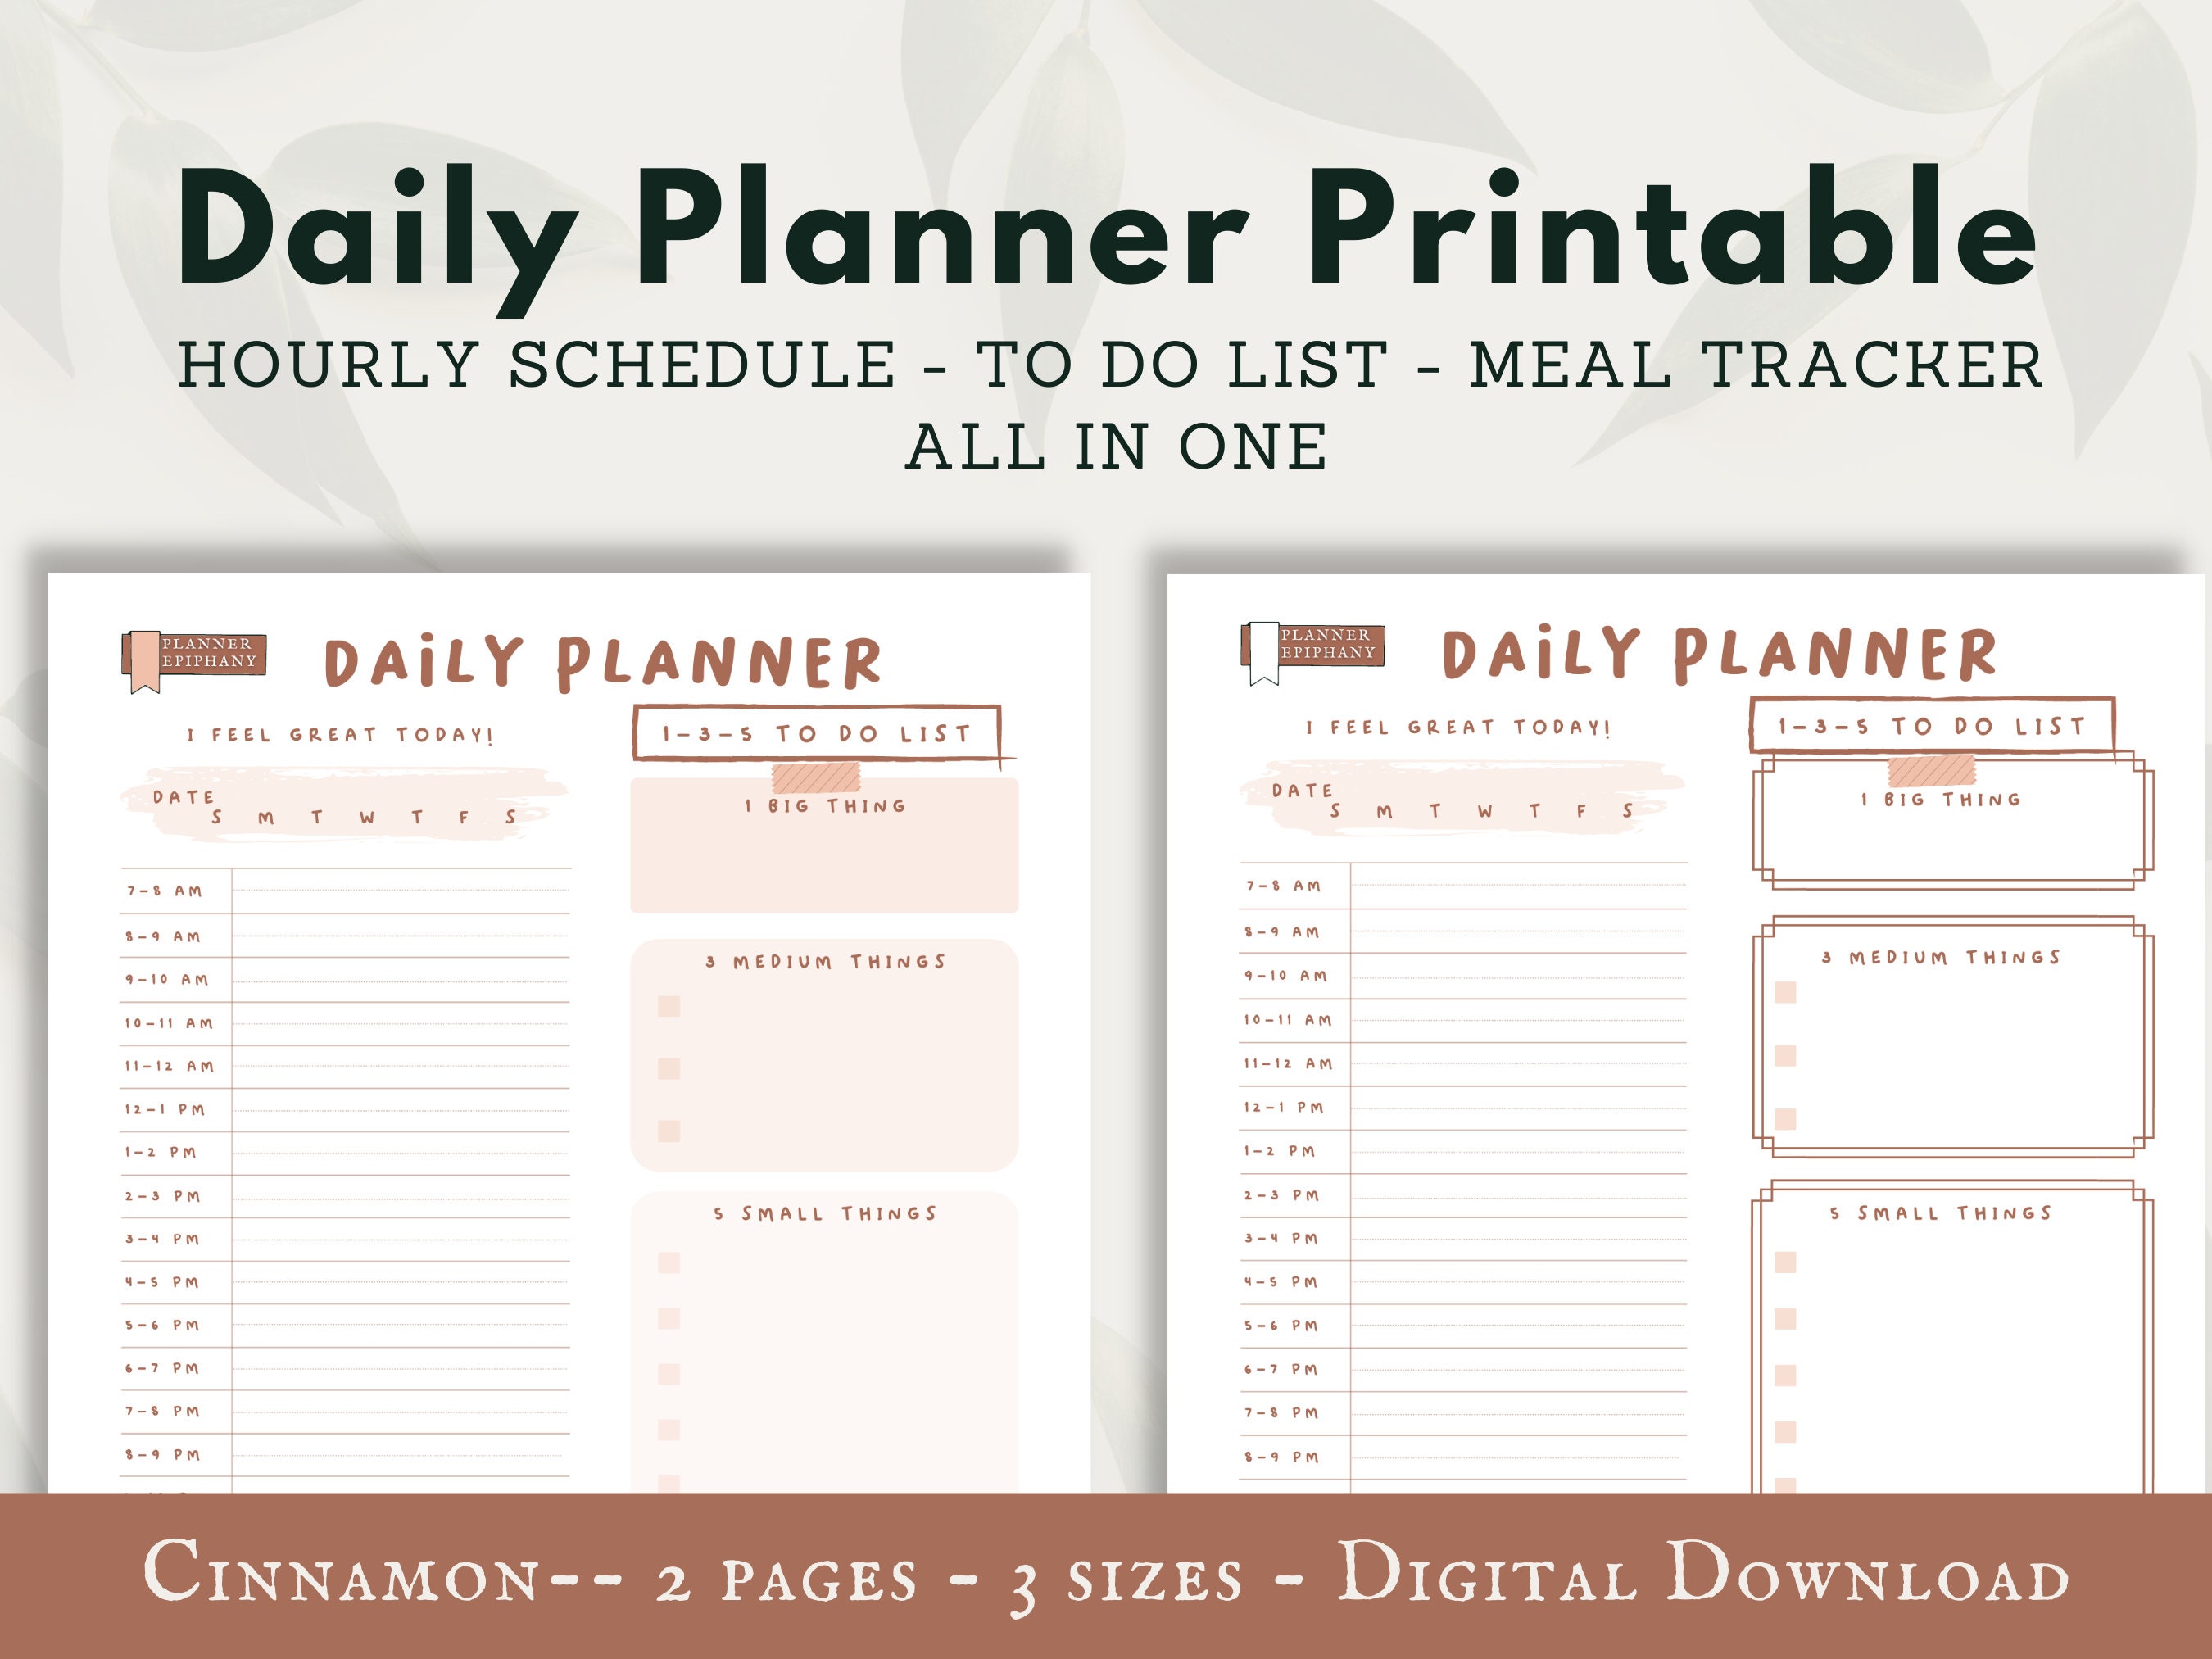 adhd-daily-planner-printable-digital-customisable-unstructured-edition